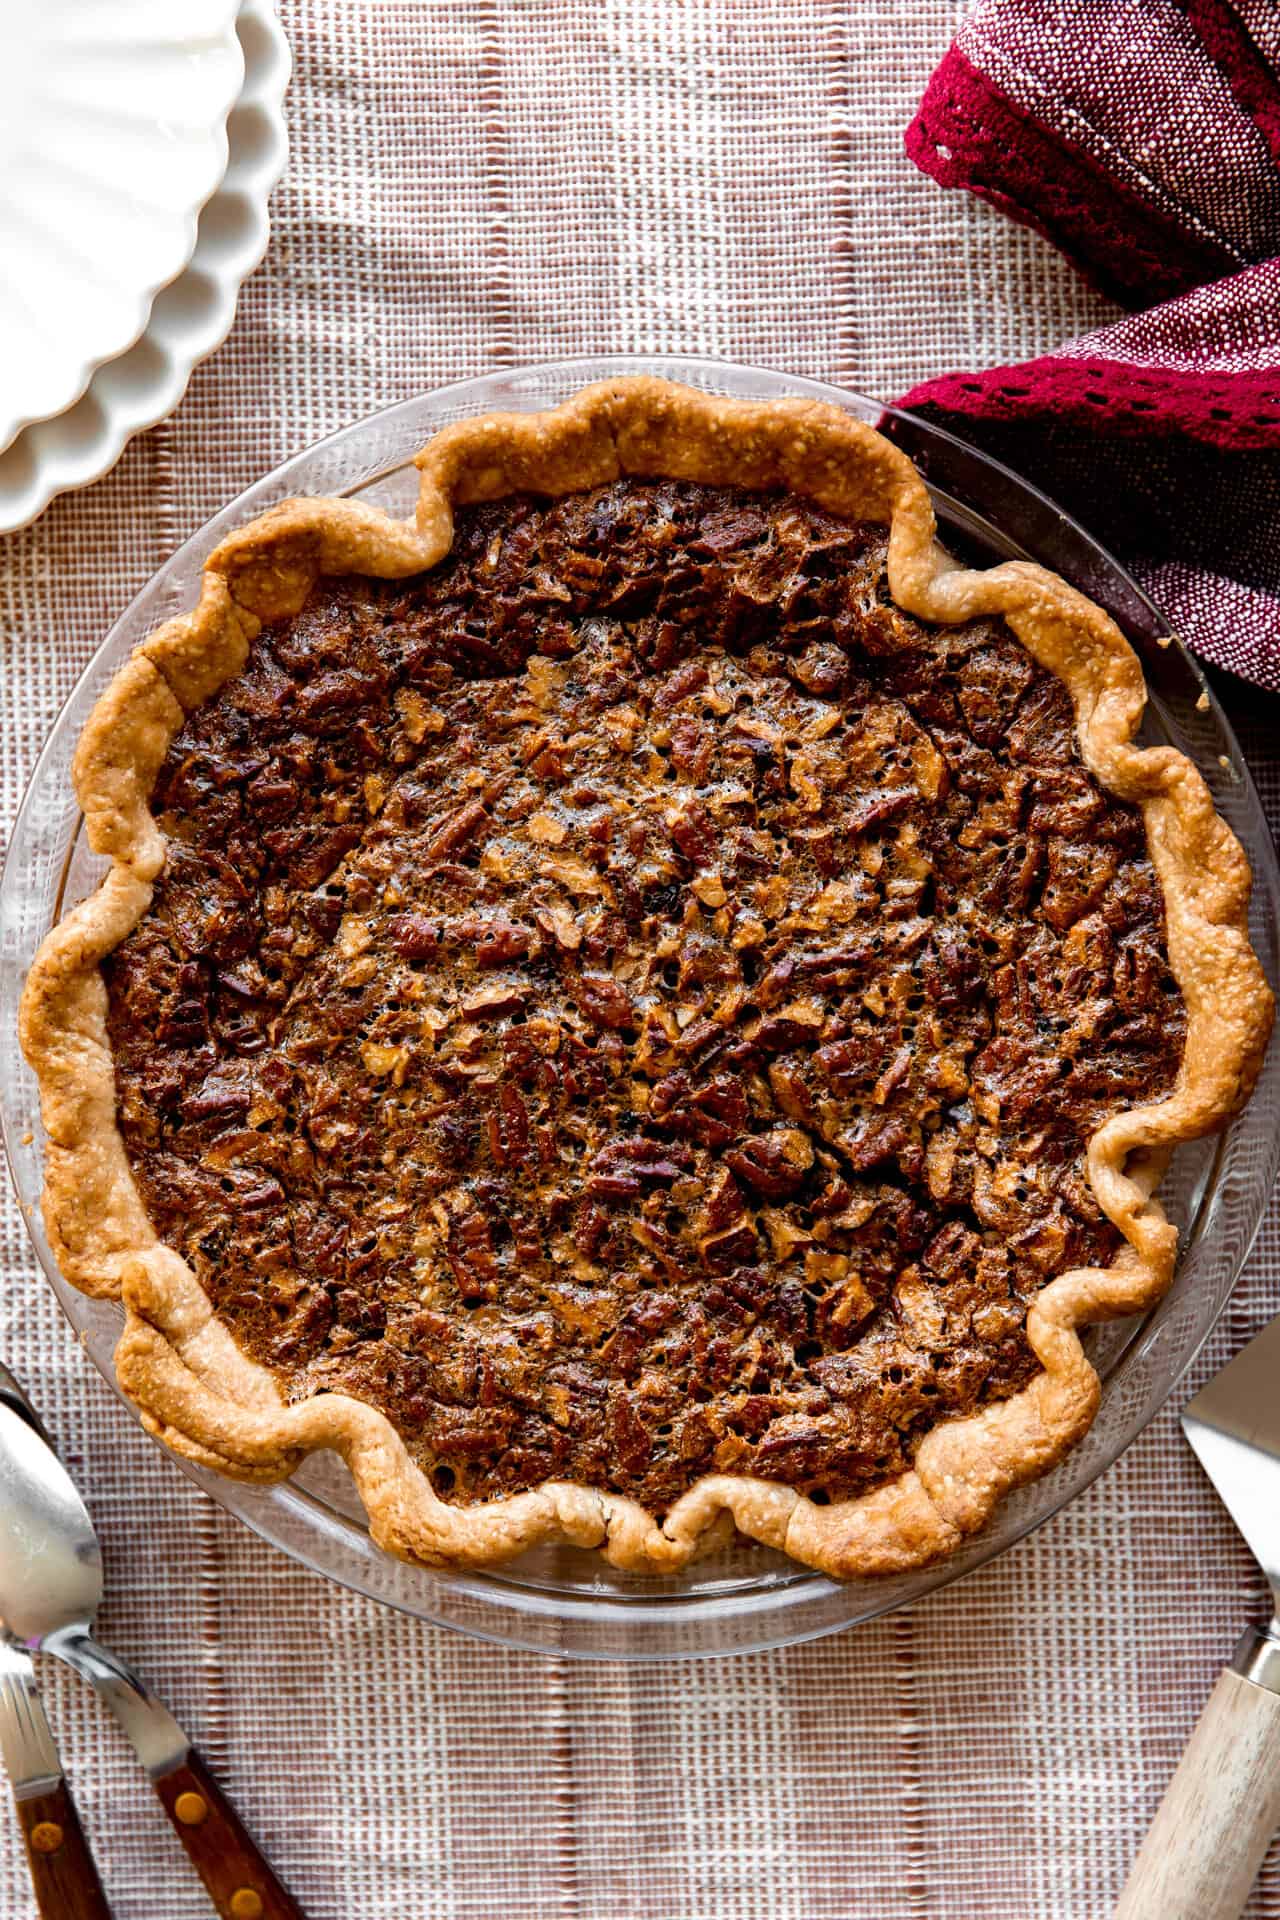 Baked pecan pie in a glass pie dish.